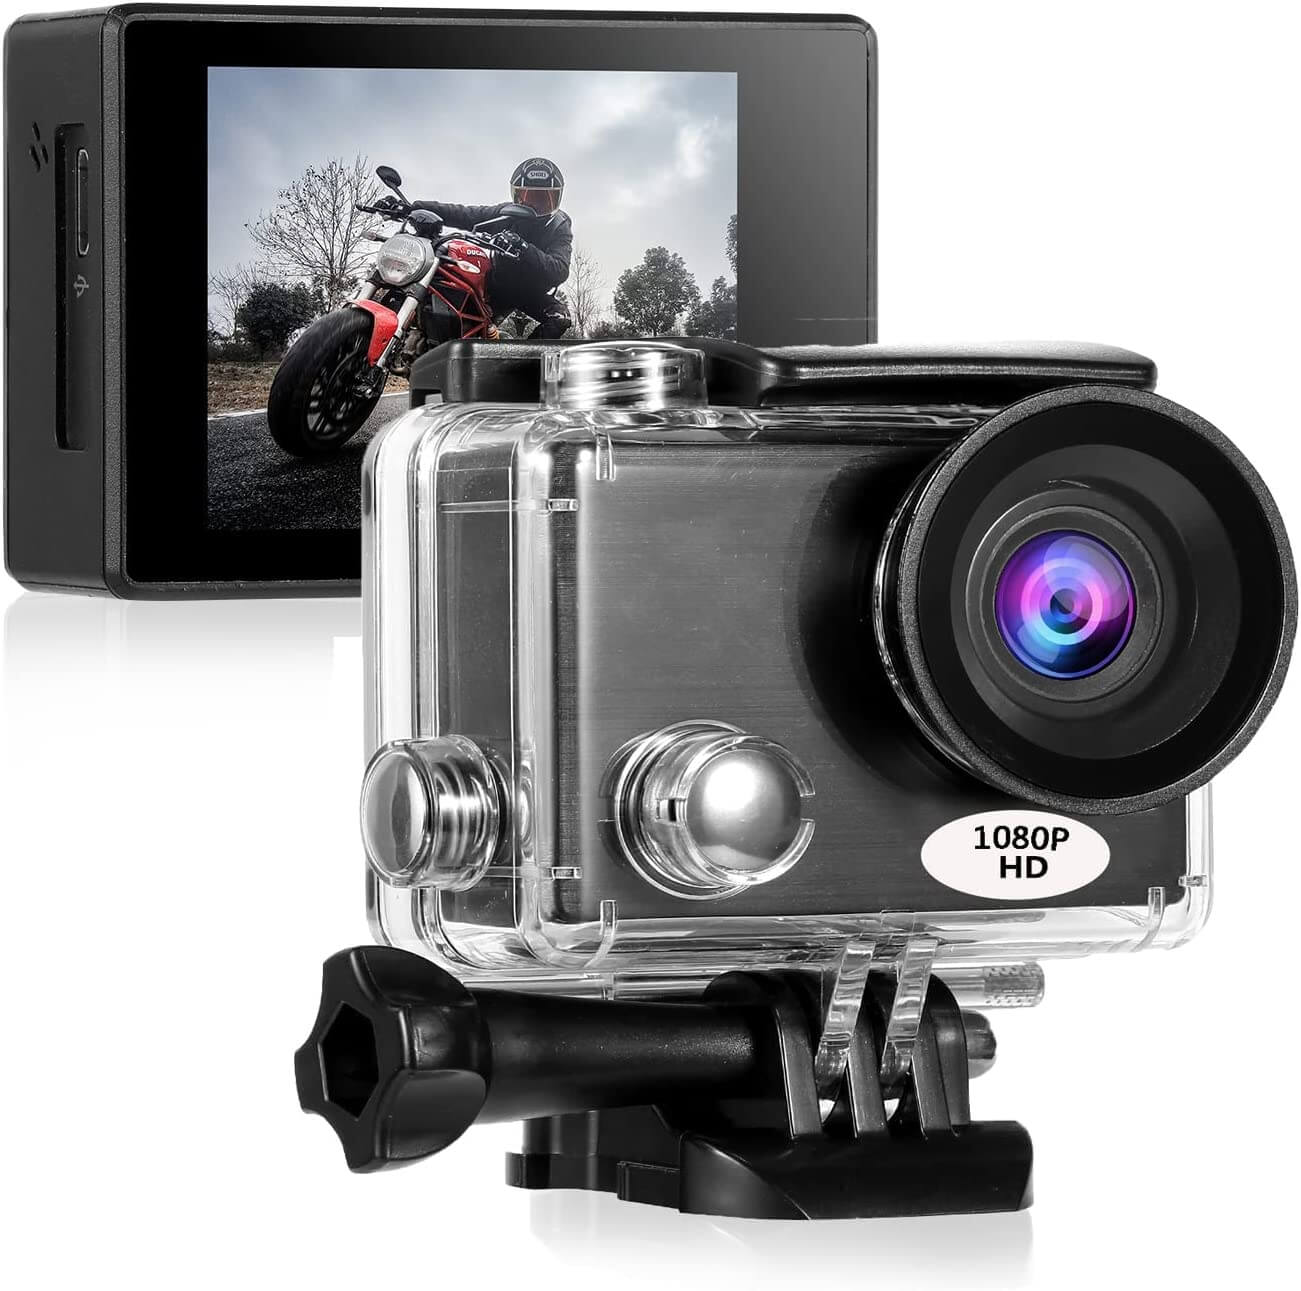 Action Sports Camera 1080P, WiFi Camera HD 2.0 Inch 40m/131ft for Cycling, Underwater Waterproof Snorkel, Surf